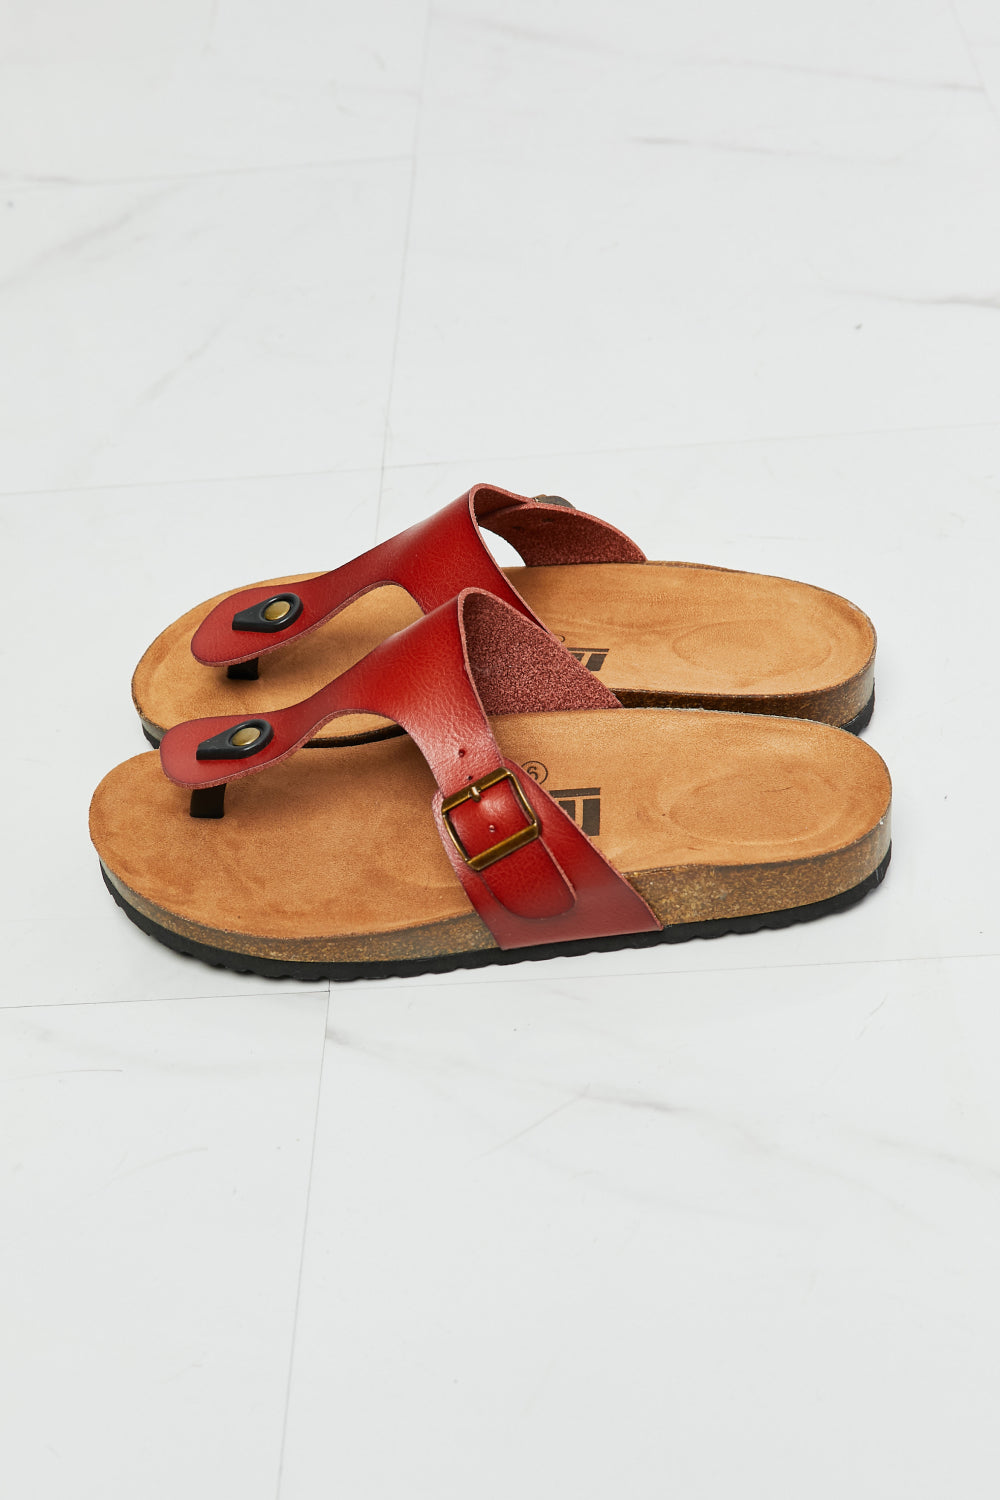 MMShoes Drift Away T-Strap Flip-Flop in Red | us.meeeshop